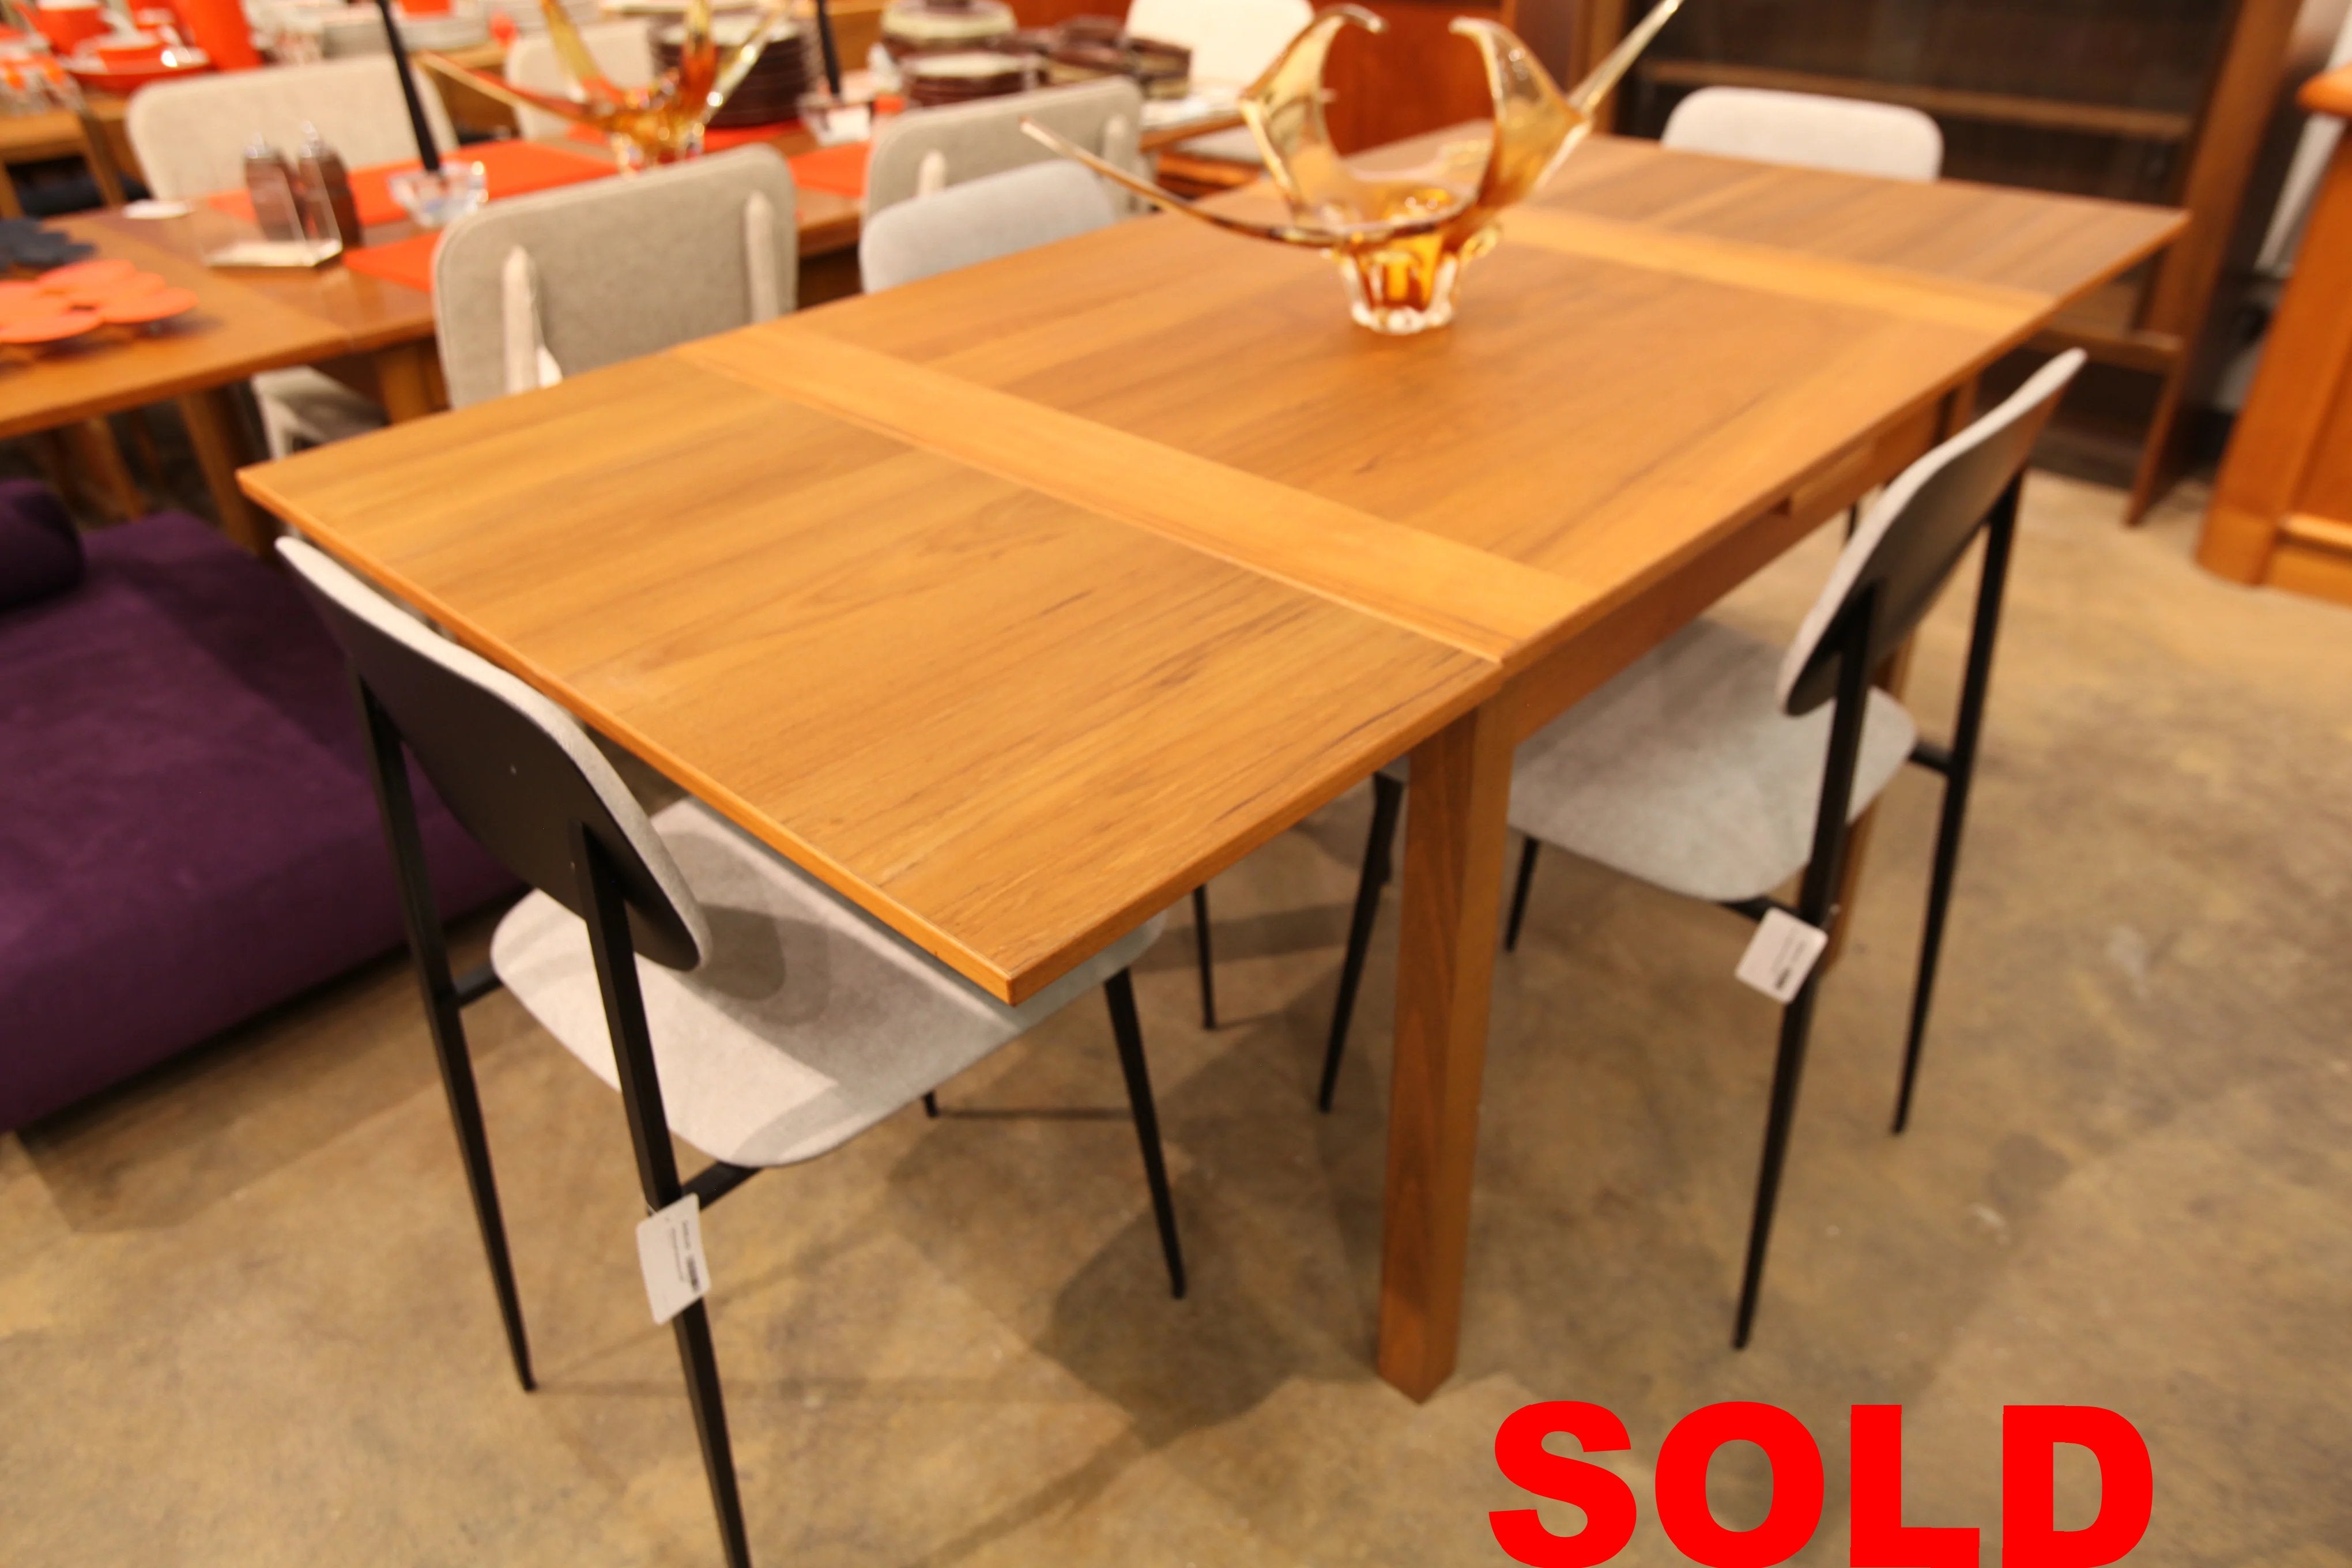 Vintage Small Square Teak Dining Table w/ Extensions (35.5" x 35.5")(65.5" x 35.5")